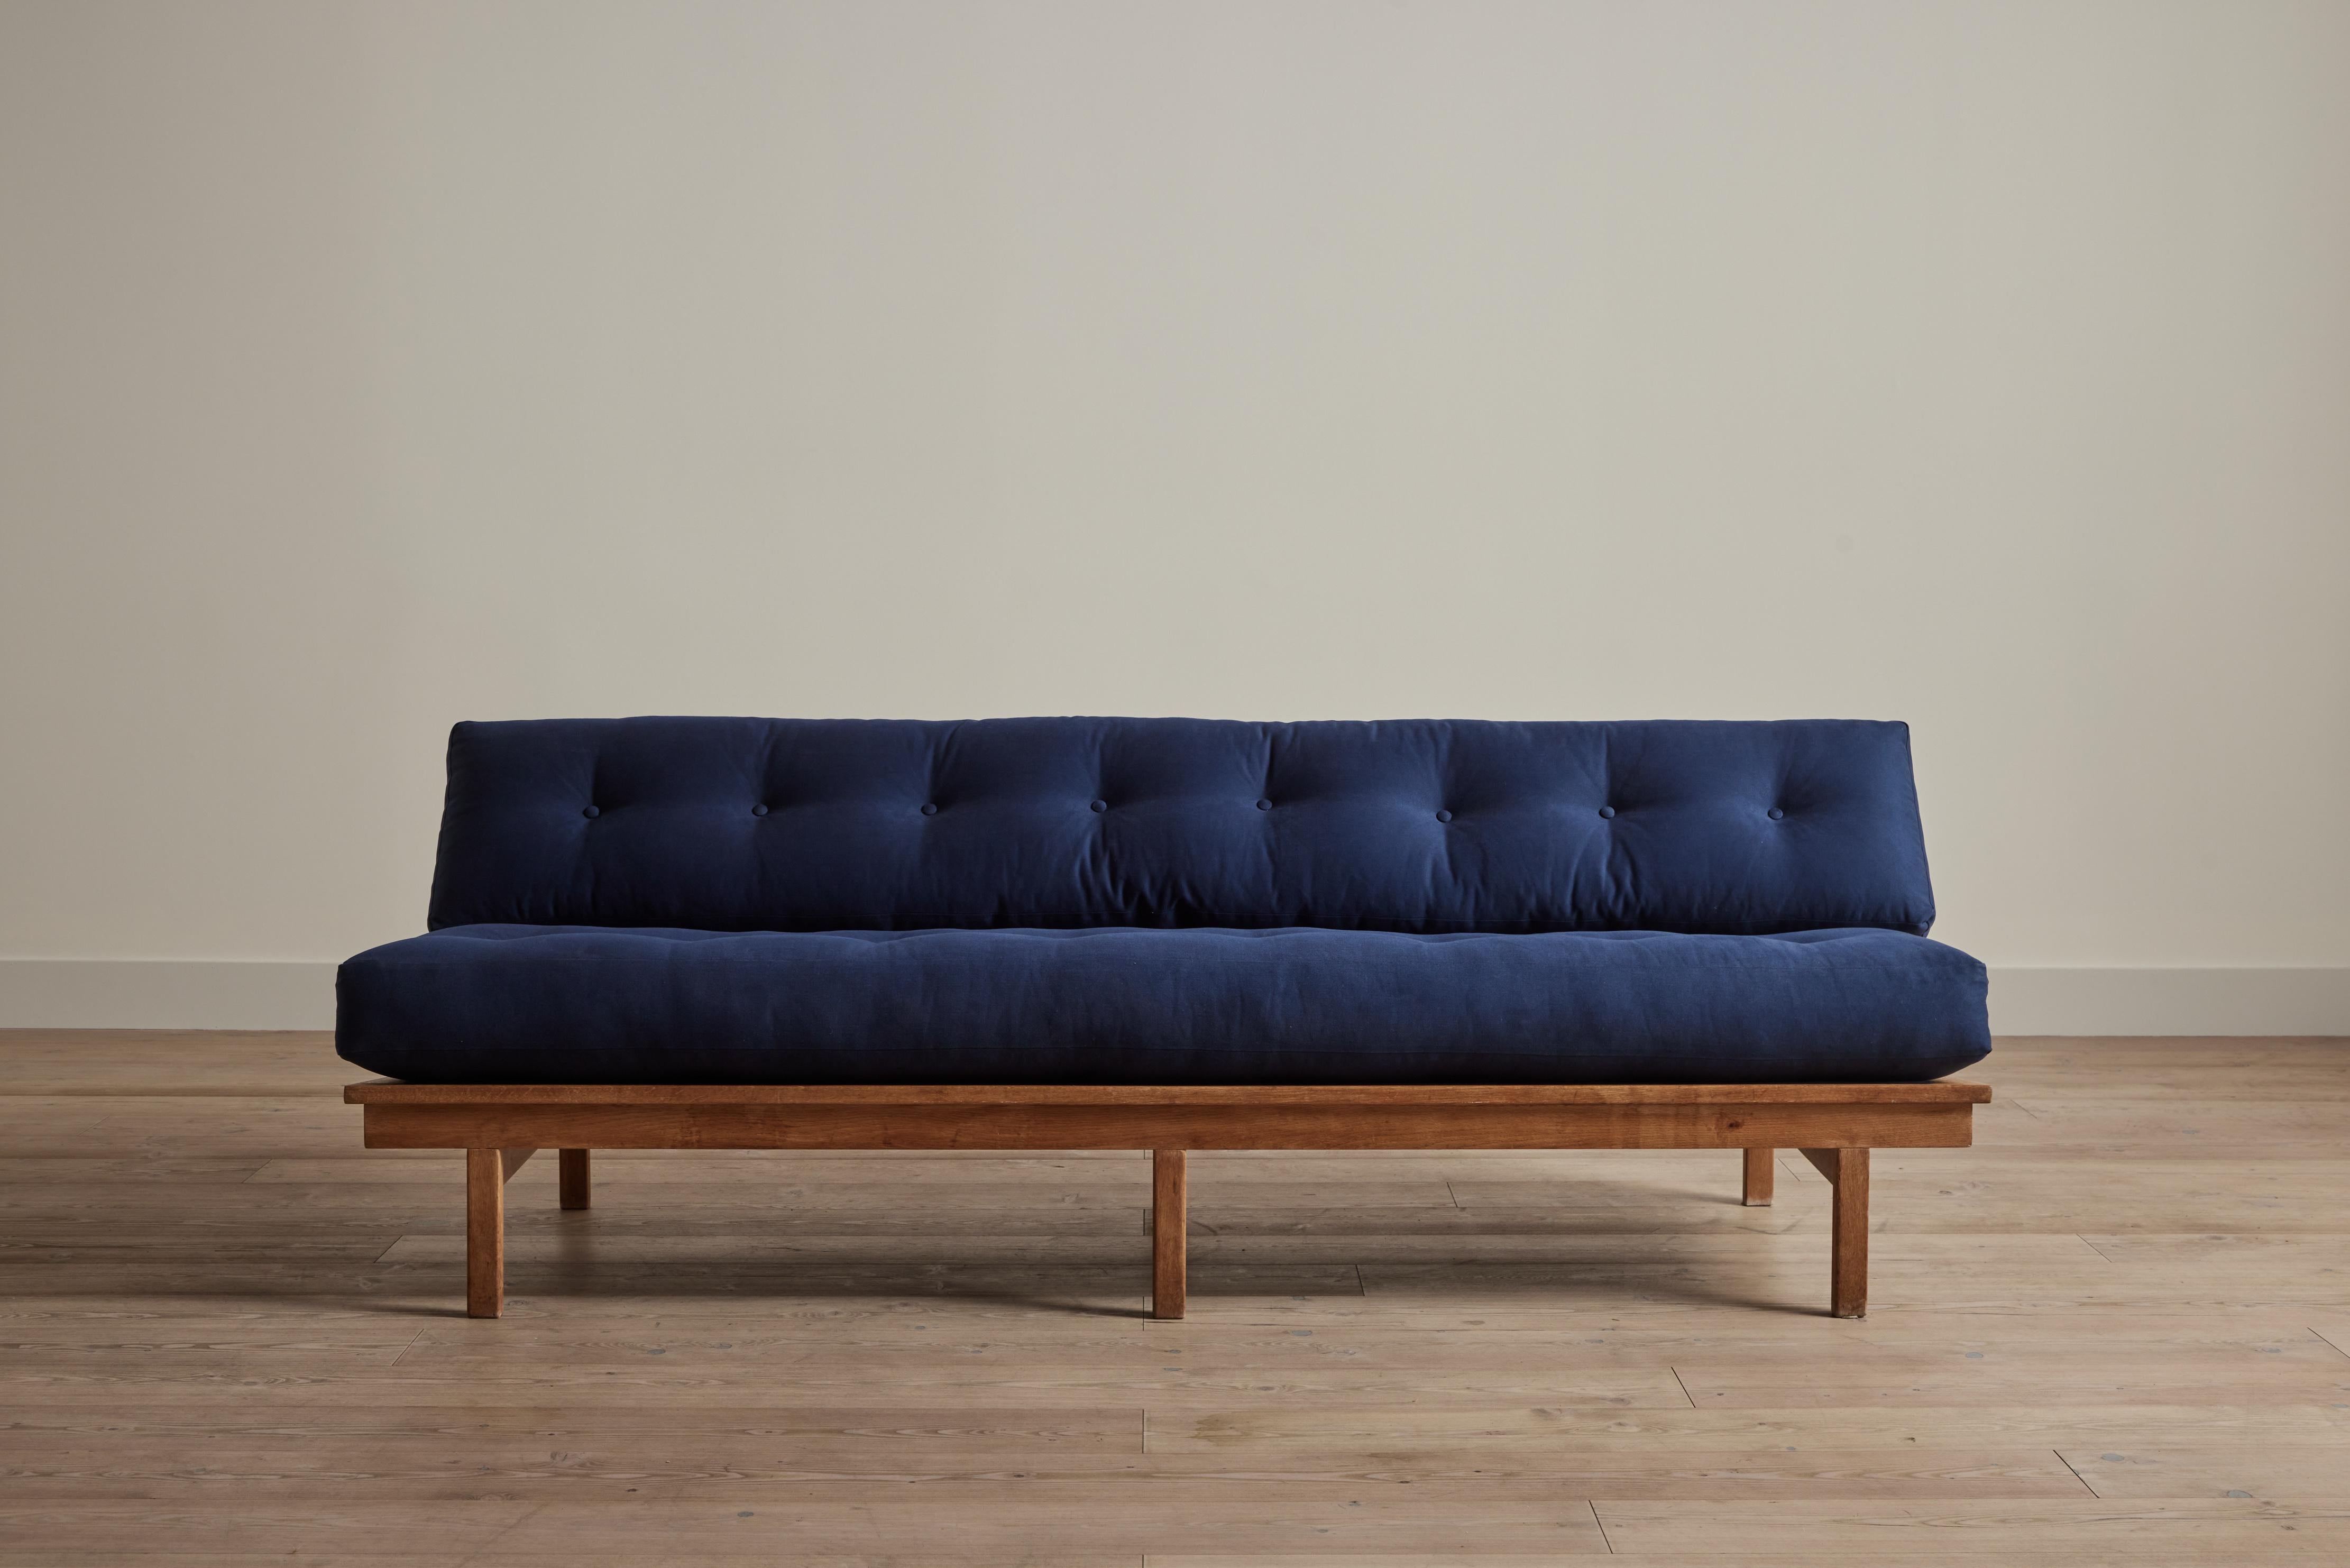 Large 1950s pine frame sofa from Denmark with new cushions upholstered in Nickey Kehoe’s cotton twill in Navy. There is some wear on wood that is consistent with age and use. 